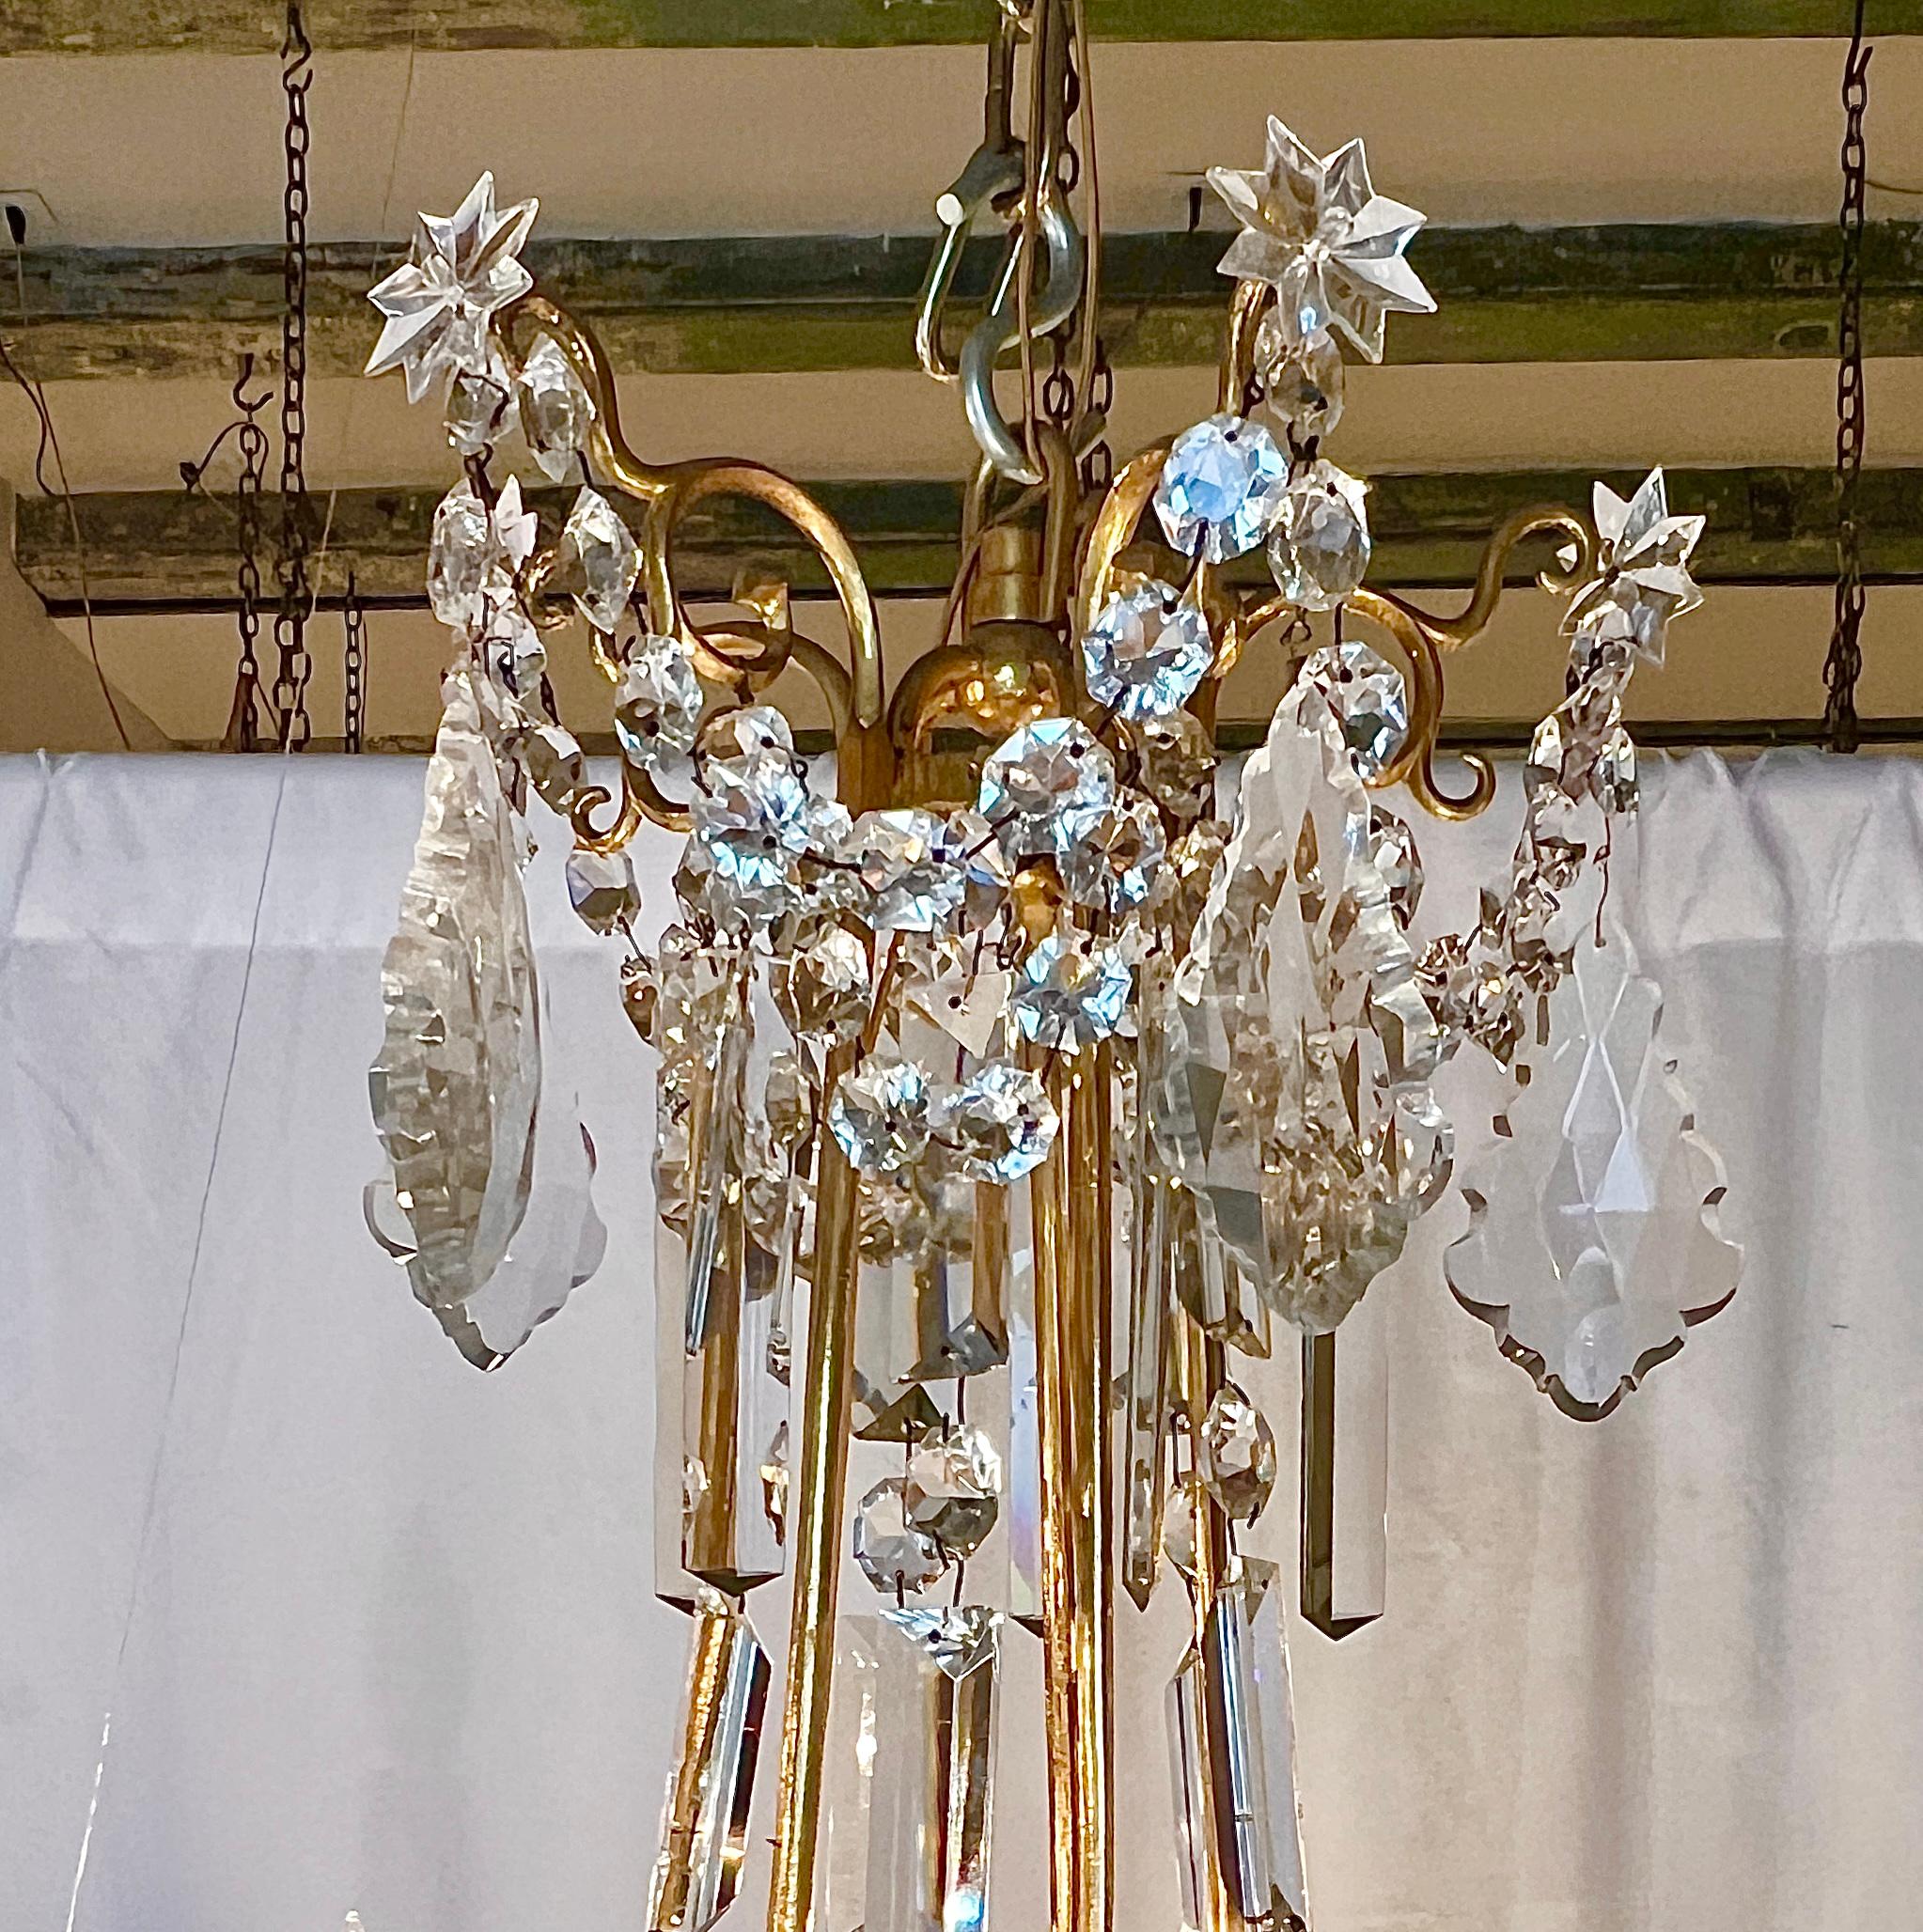 Finest Antique French Gold Bronze & Baccarat Crystal Chandelier Circa 1880-1890.  Exquisite draping.